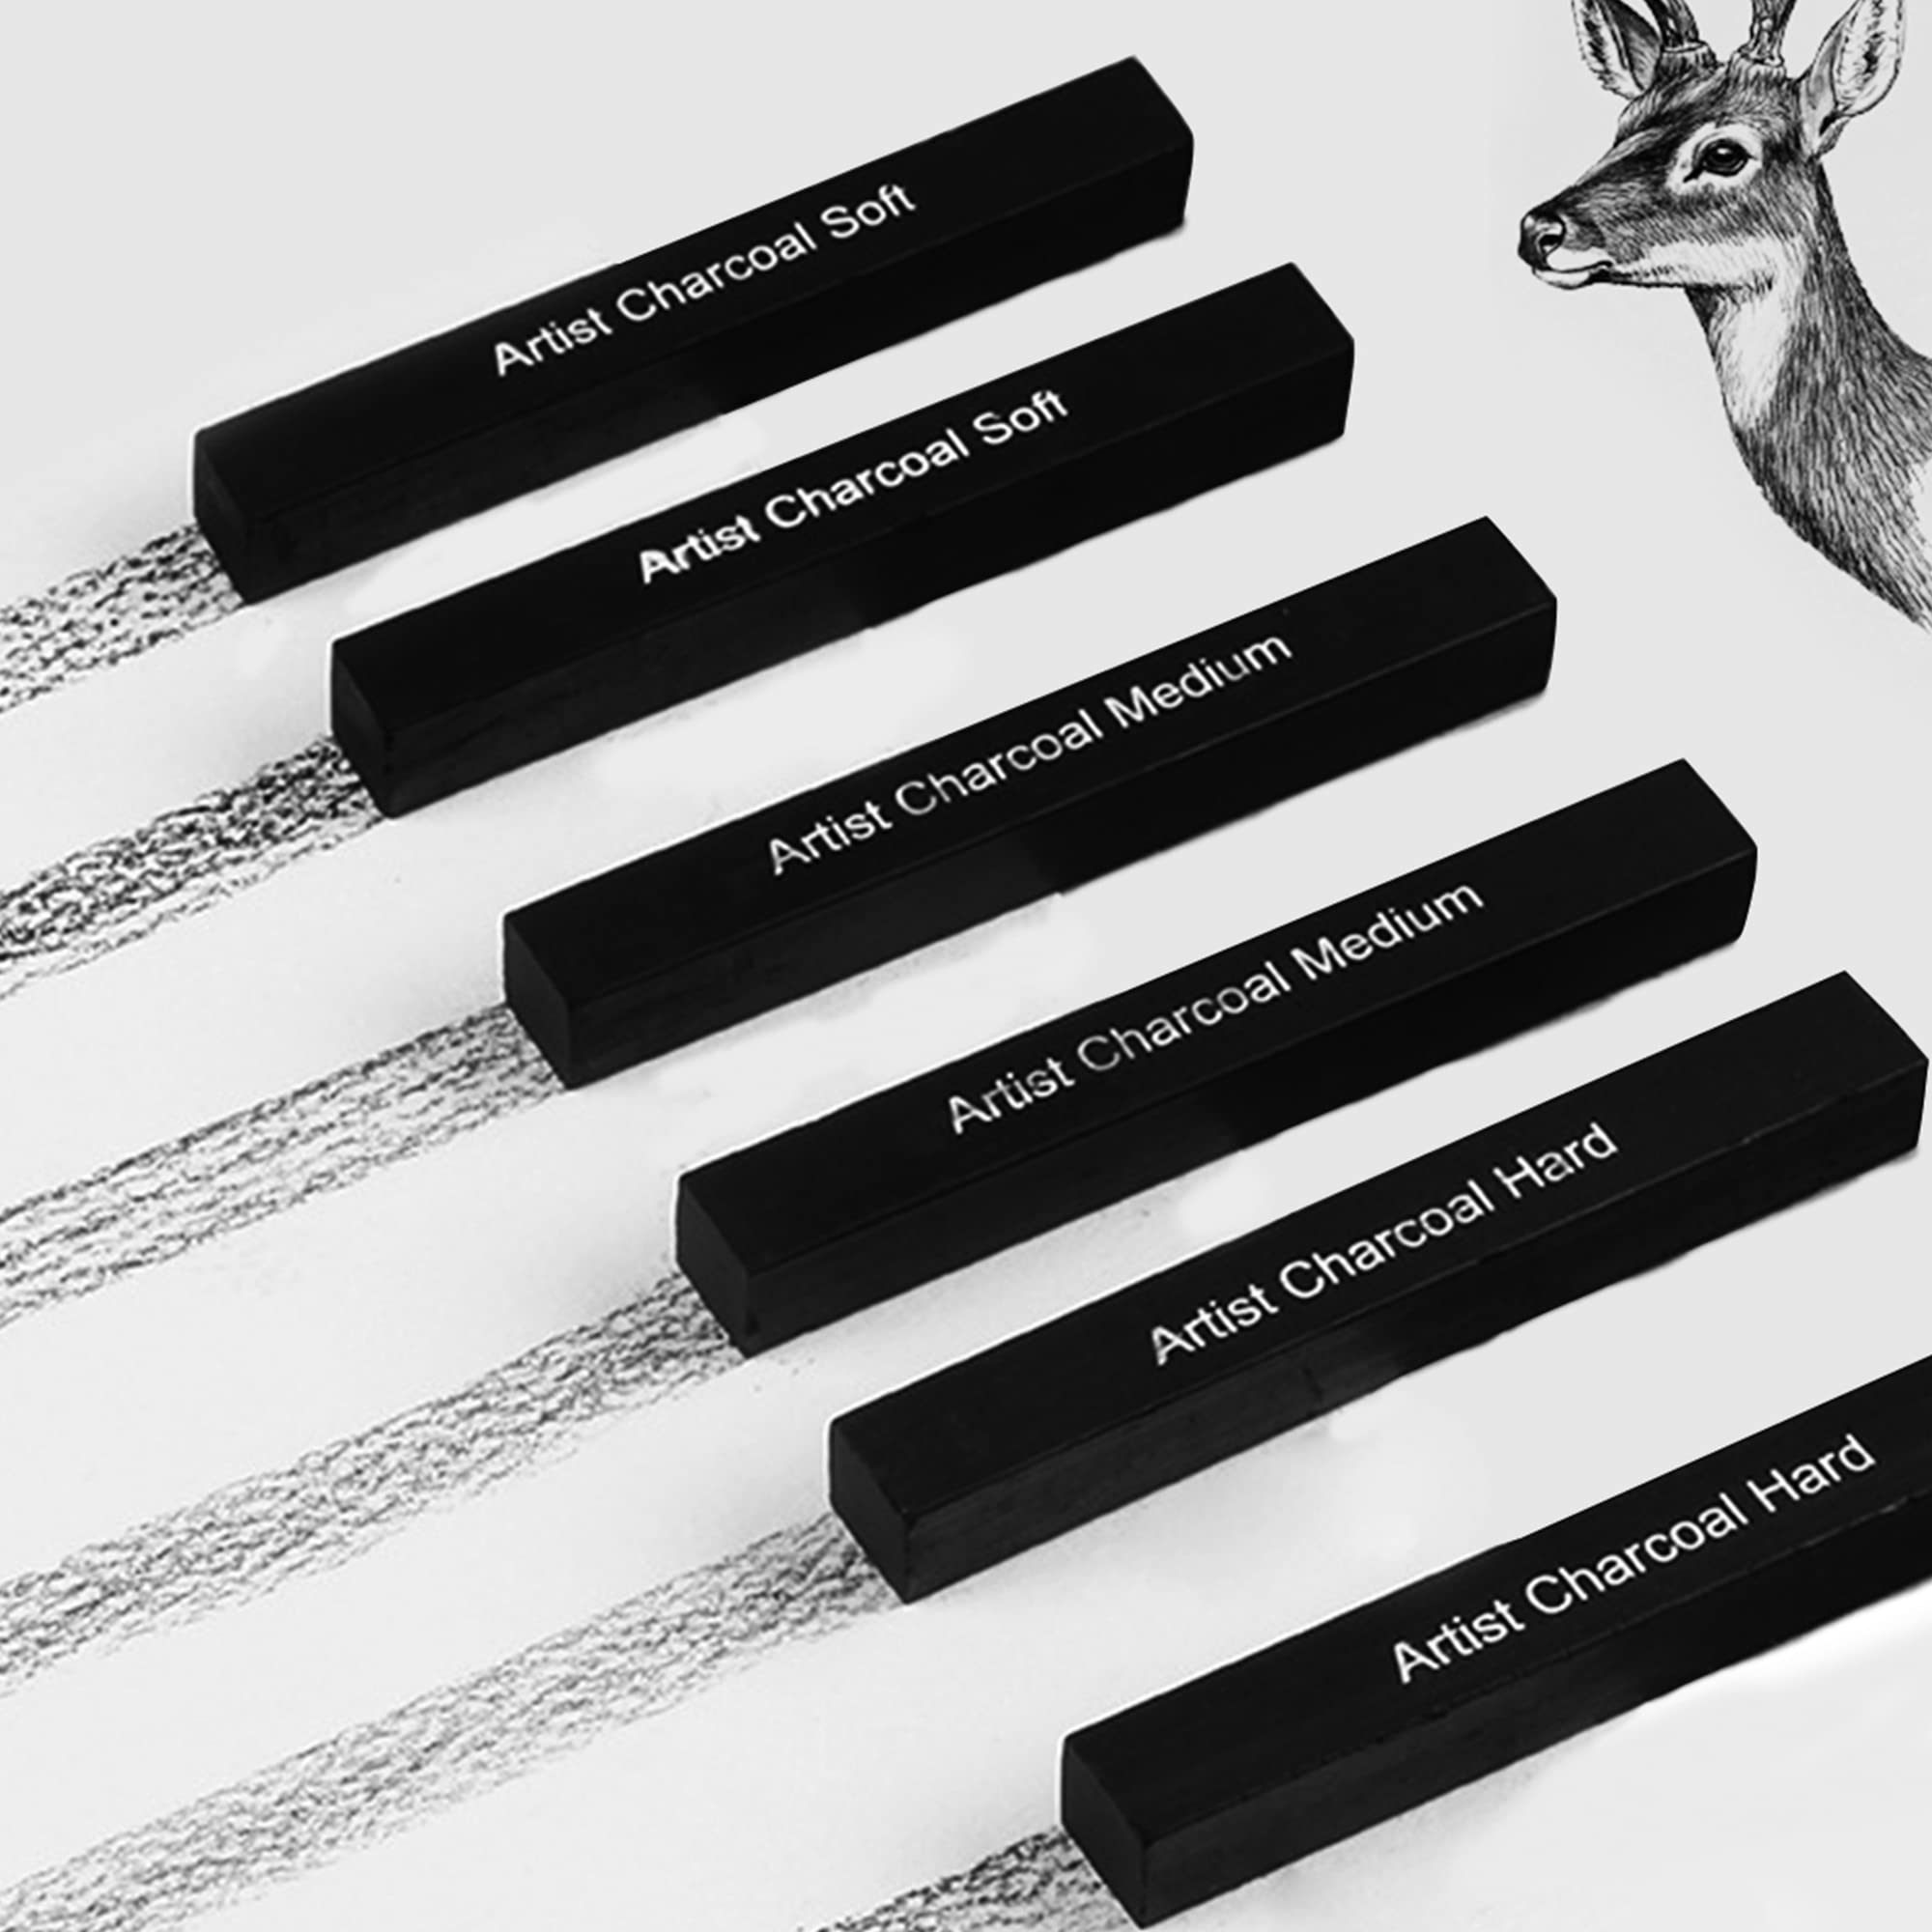  Artist Compressed Charcoal Stick Assorted Soft Medium Hard  Artist Charcoal Medium for Drawing Sketching Shading, Art Supplies Sketch  Kits Tools Pack of 6